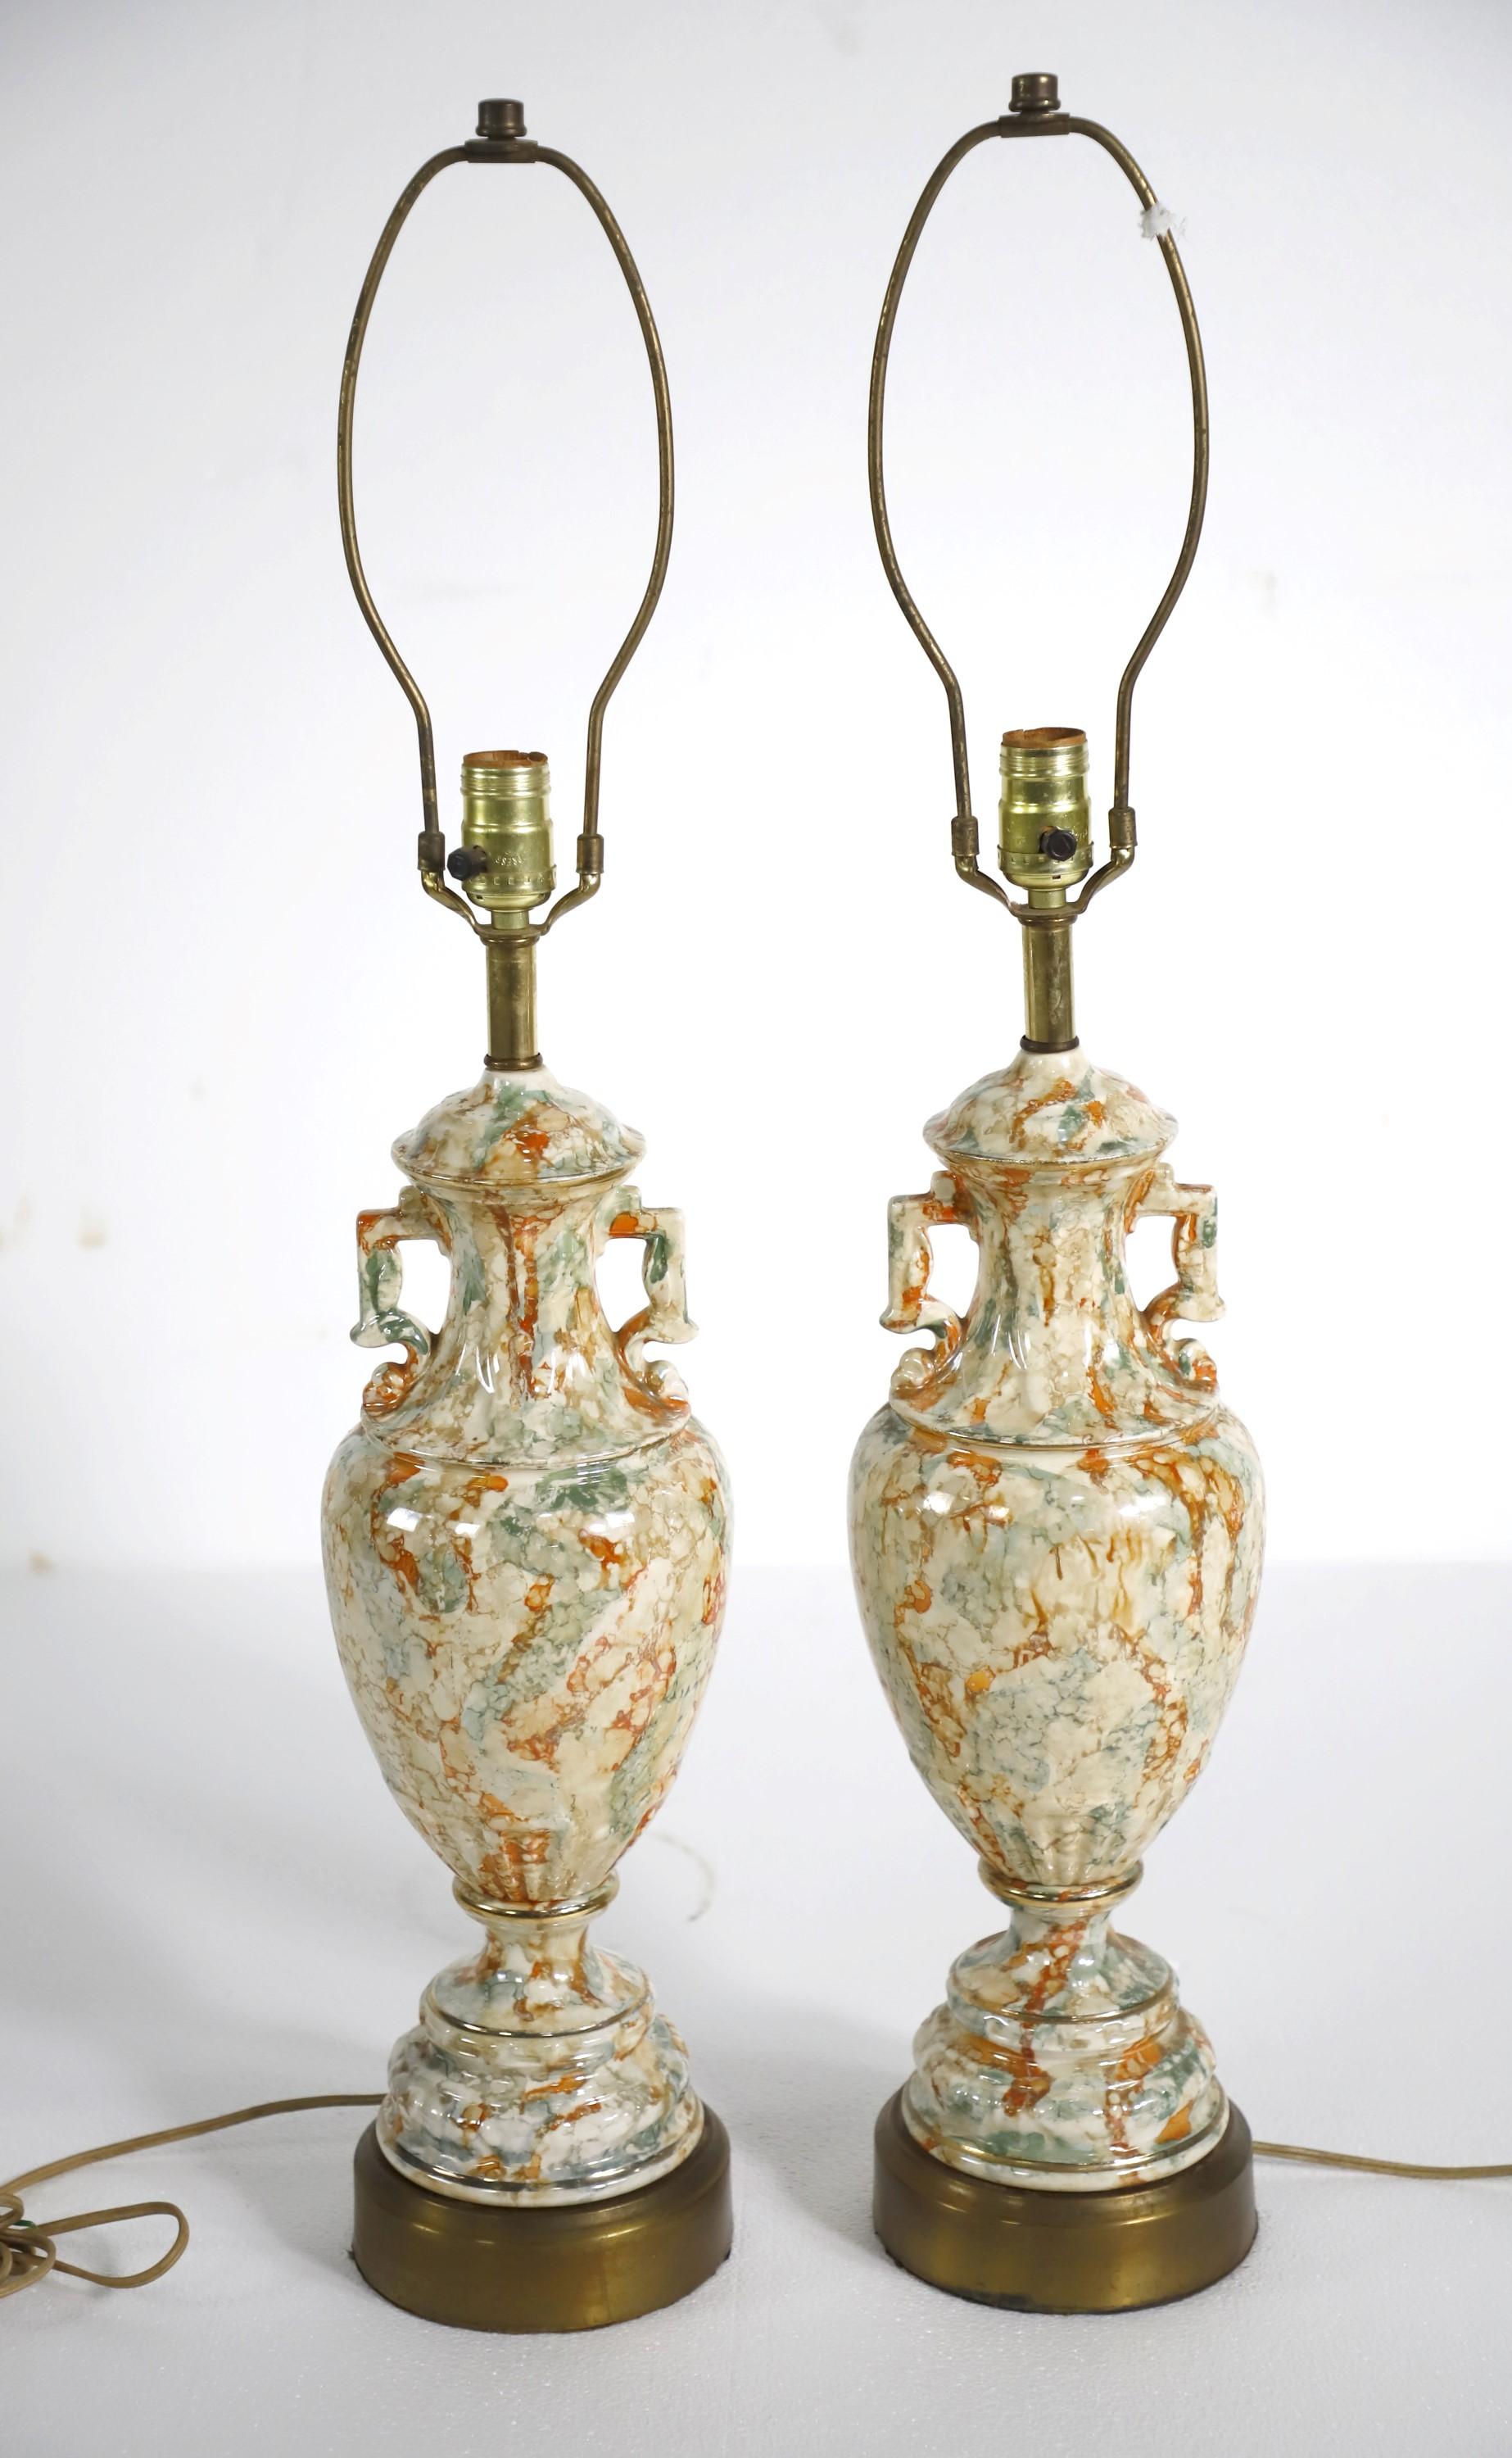 Urn shaped glazed ceramic table lamps with a colorful marble effect of orange, green, beige, and off white. The base is made of brass plated metal. There is some wear on the base. Please see the photos. Cleaned and restored. Priced as a pair. Please